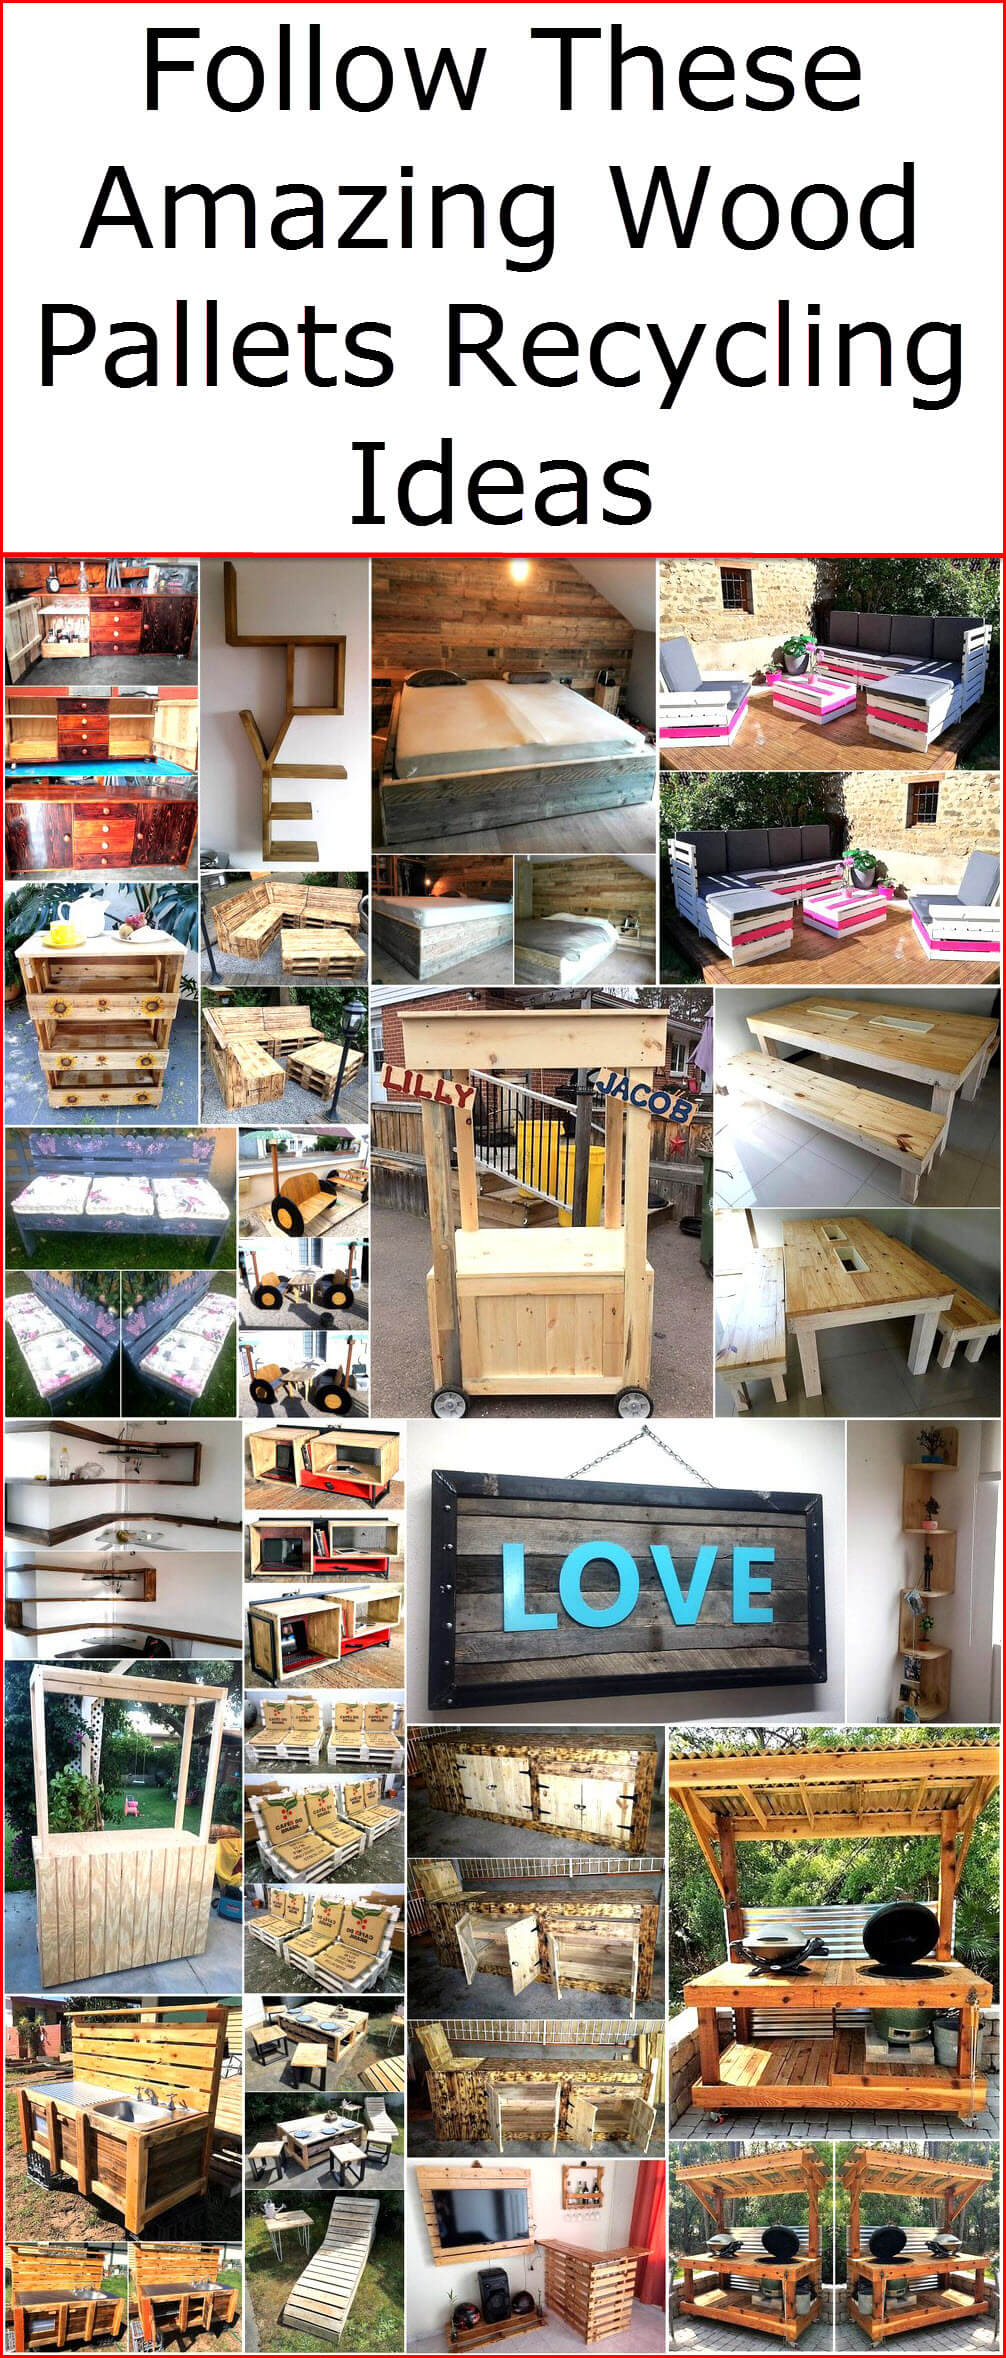 Follow These Amazing Wood Pallets Recycling Ideas